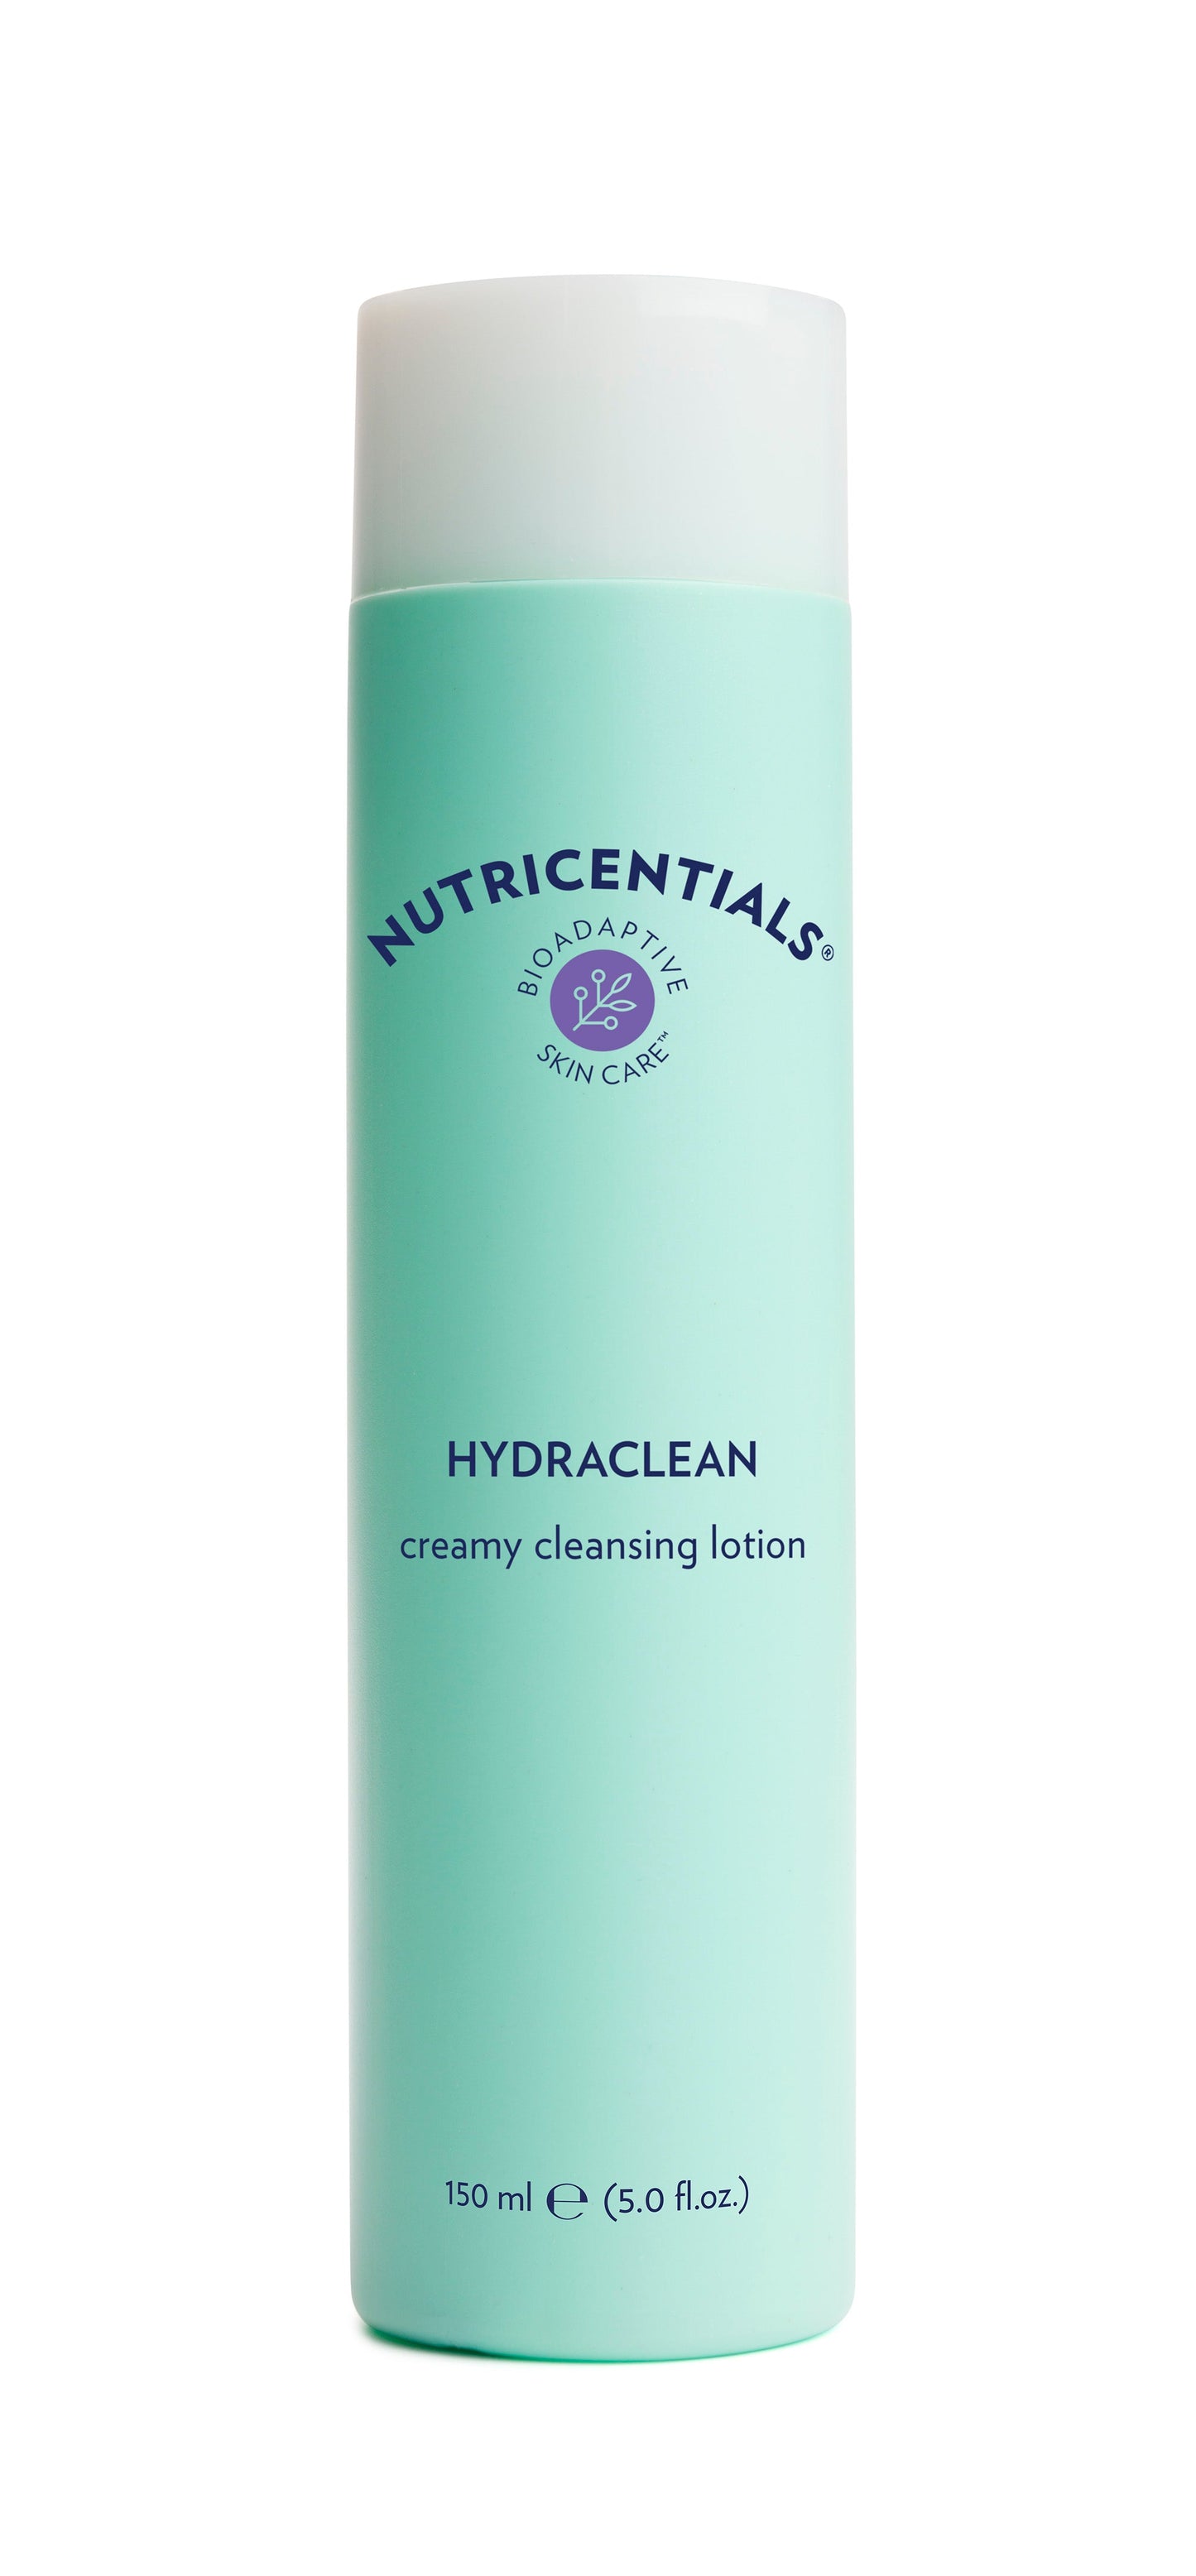 Cleansing gel from Nu Skin: HydraClean Creamy Cleansing Lotion